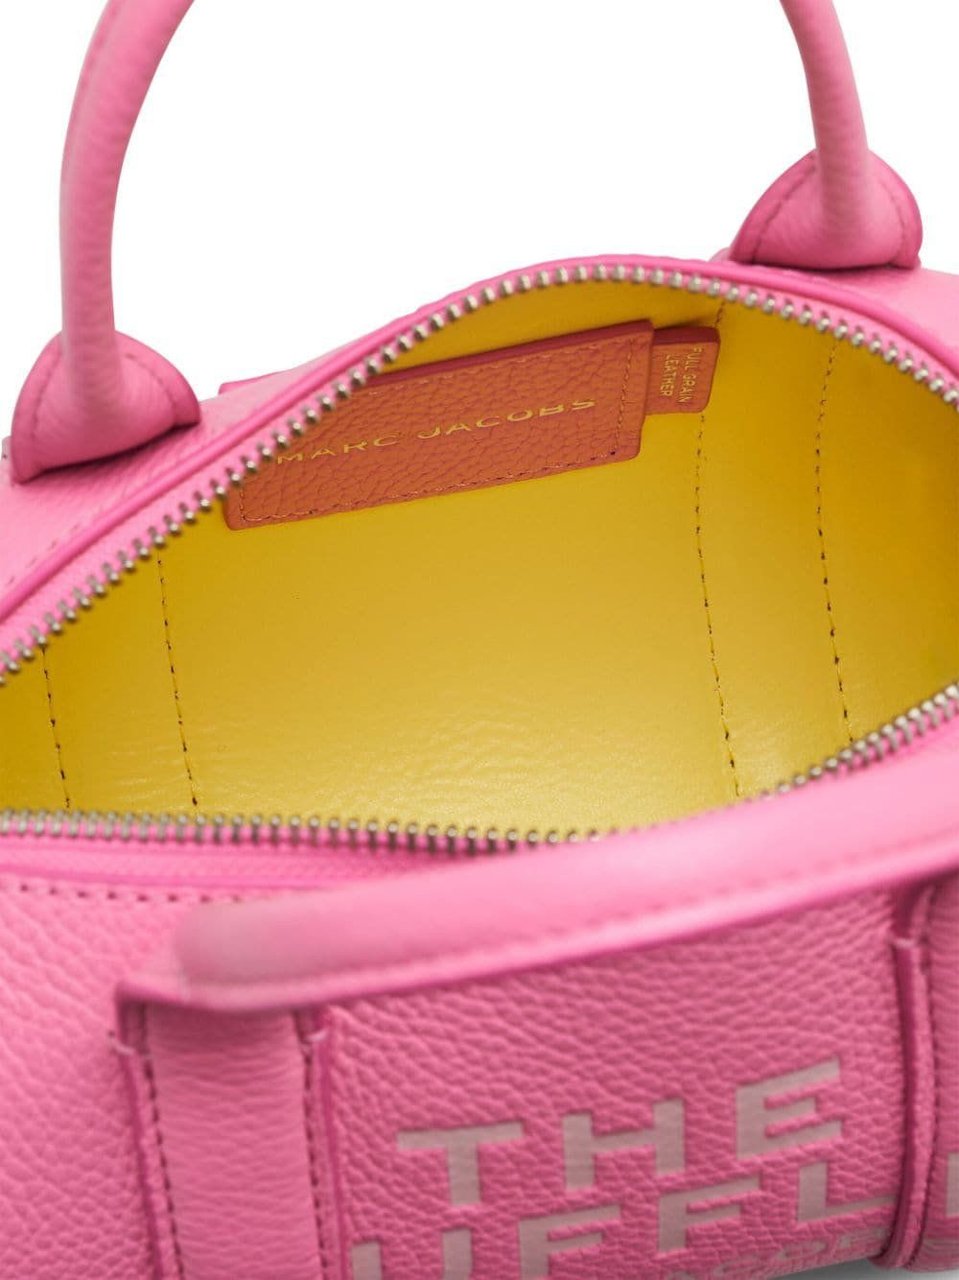 Marc Jacobs Bags Pink Roze